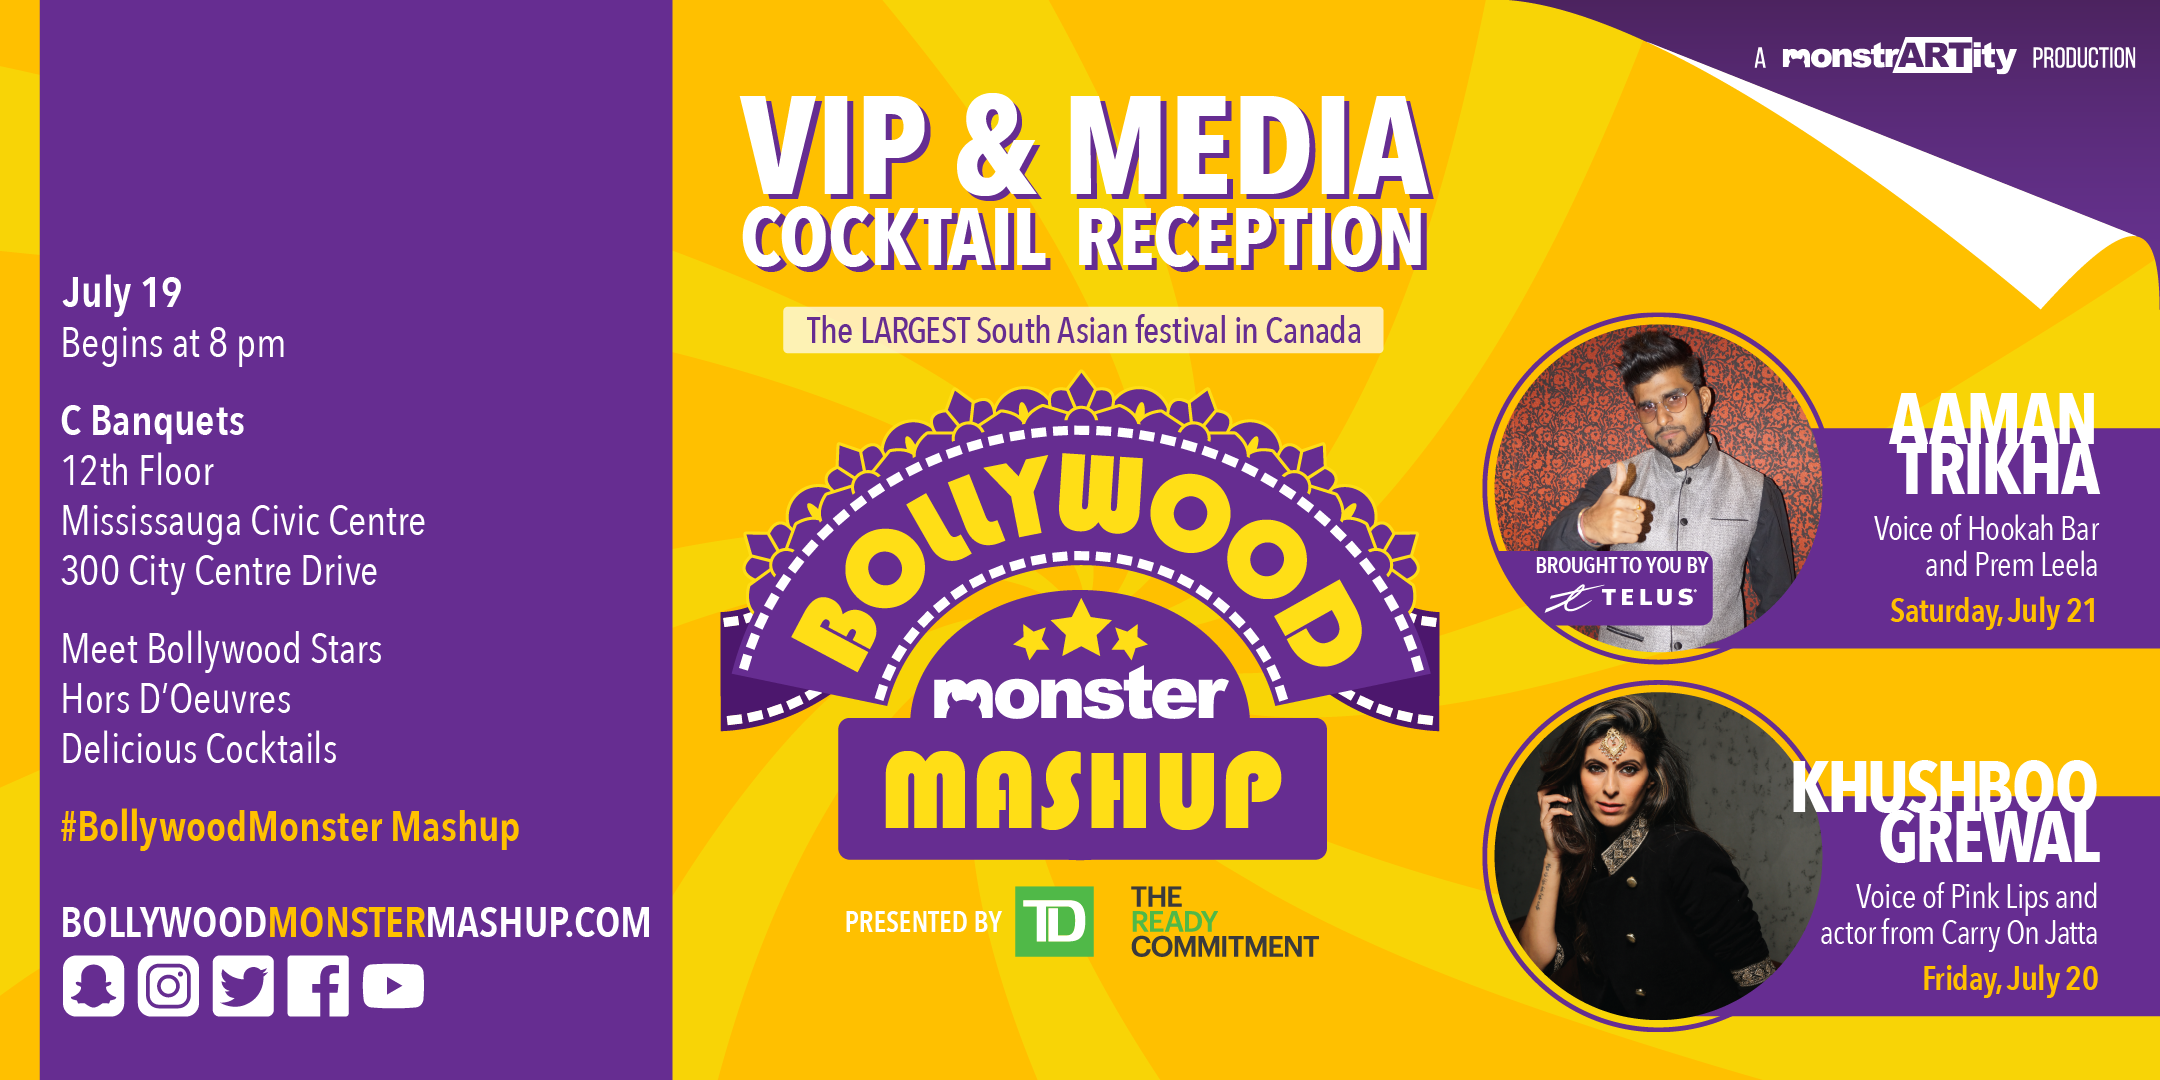 Bollywood Monster Mashup Promo Image Featuring Aaman Trikha brought to you by Telus and Khushboo Grewal